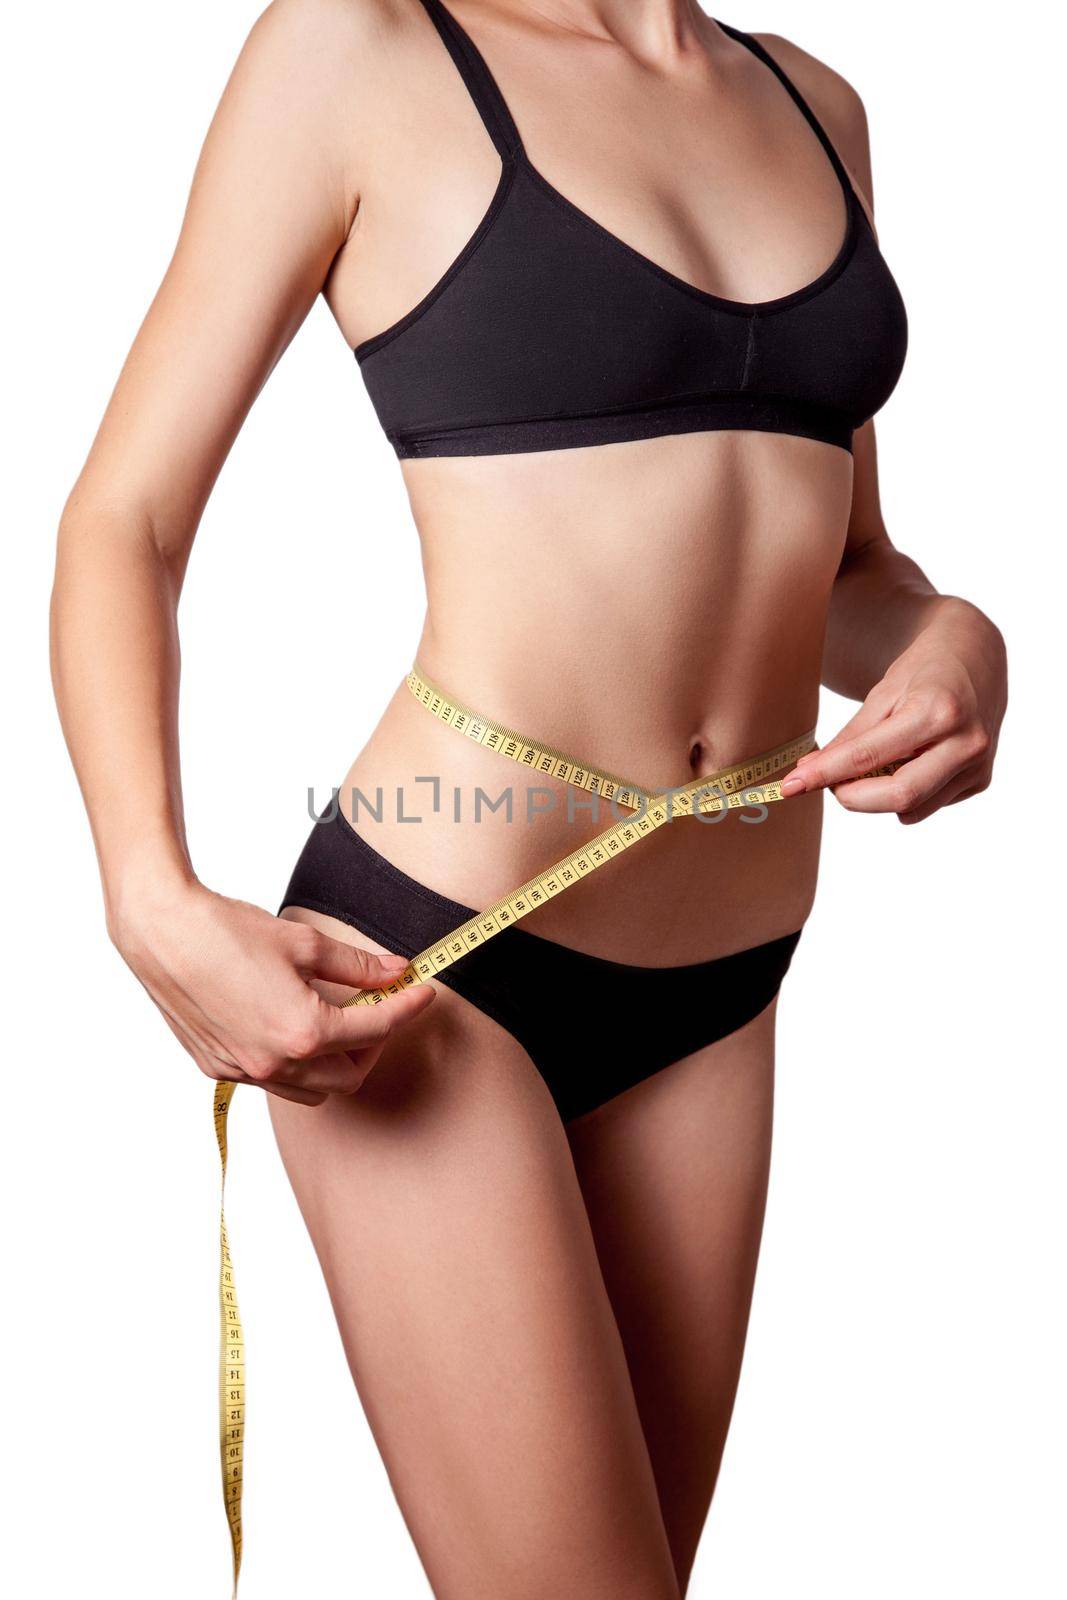 Slim fit happy young woman with measure tape measuring her waist with black underwear, isolated on white background. studio shot.